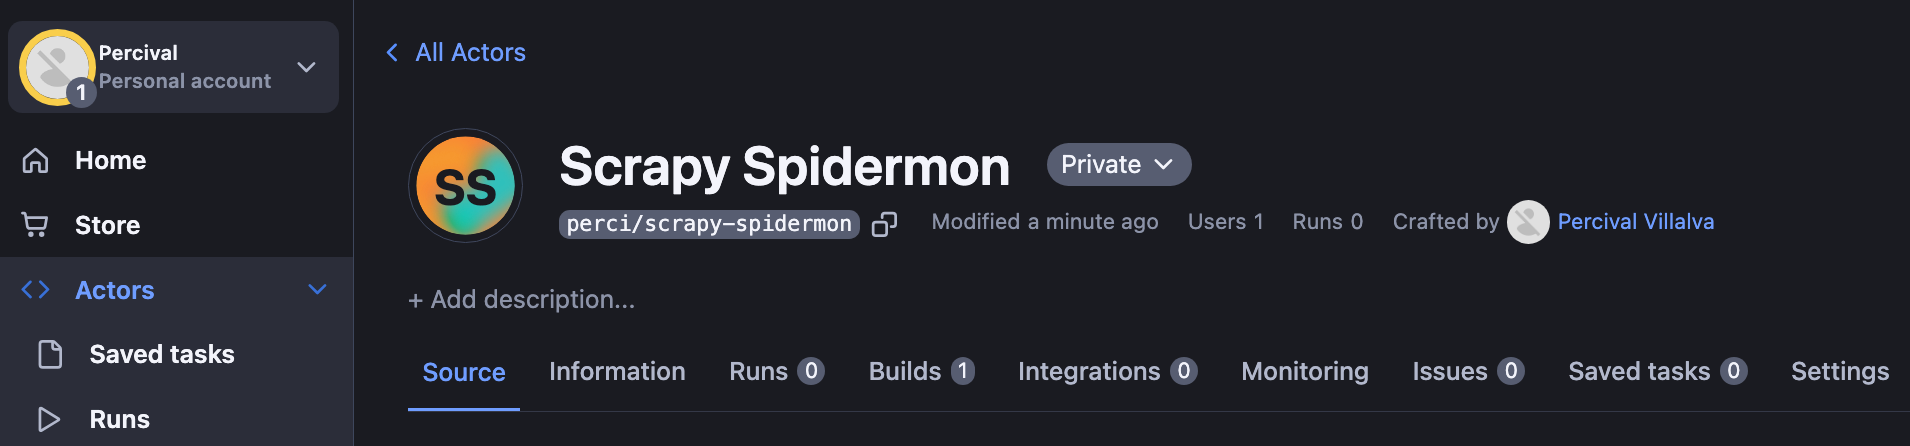 Scrapy Spidermon Actor on Apify